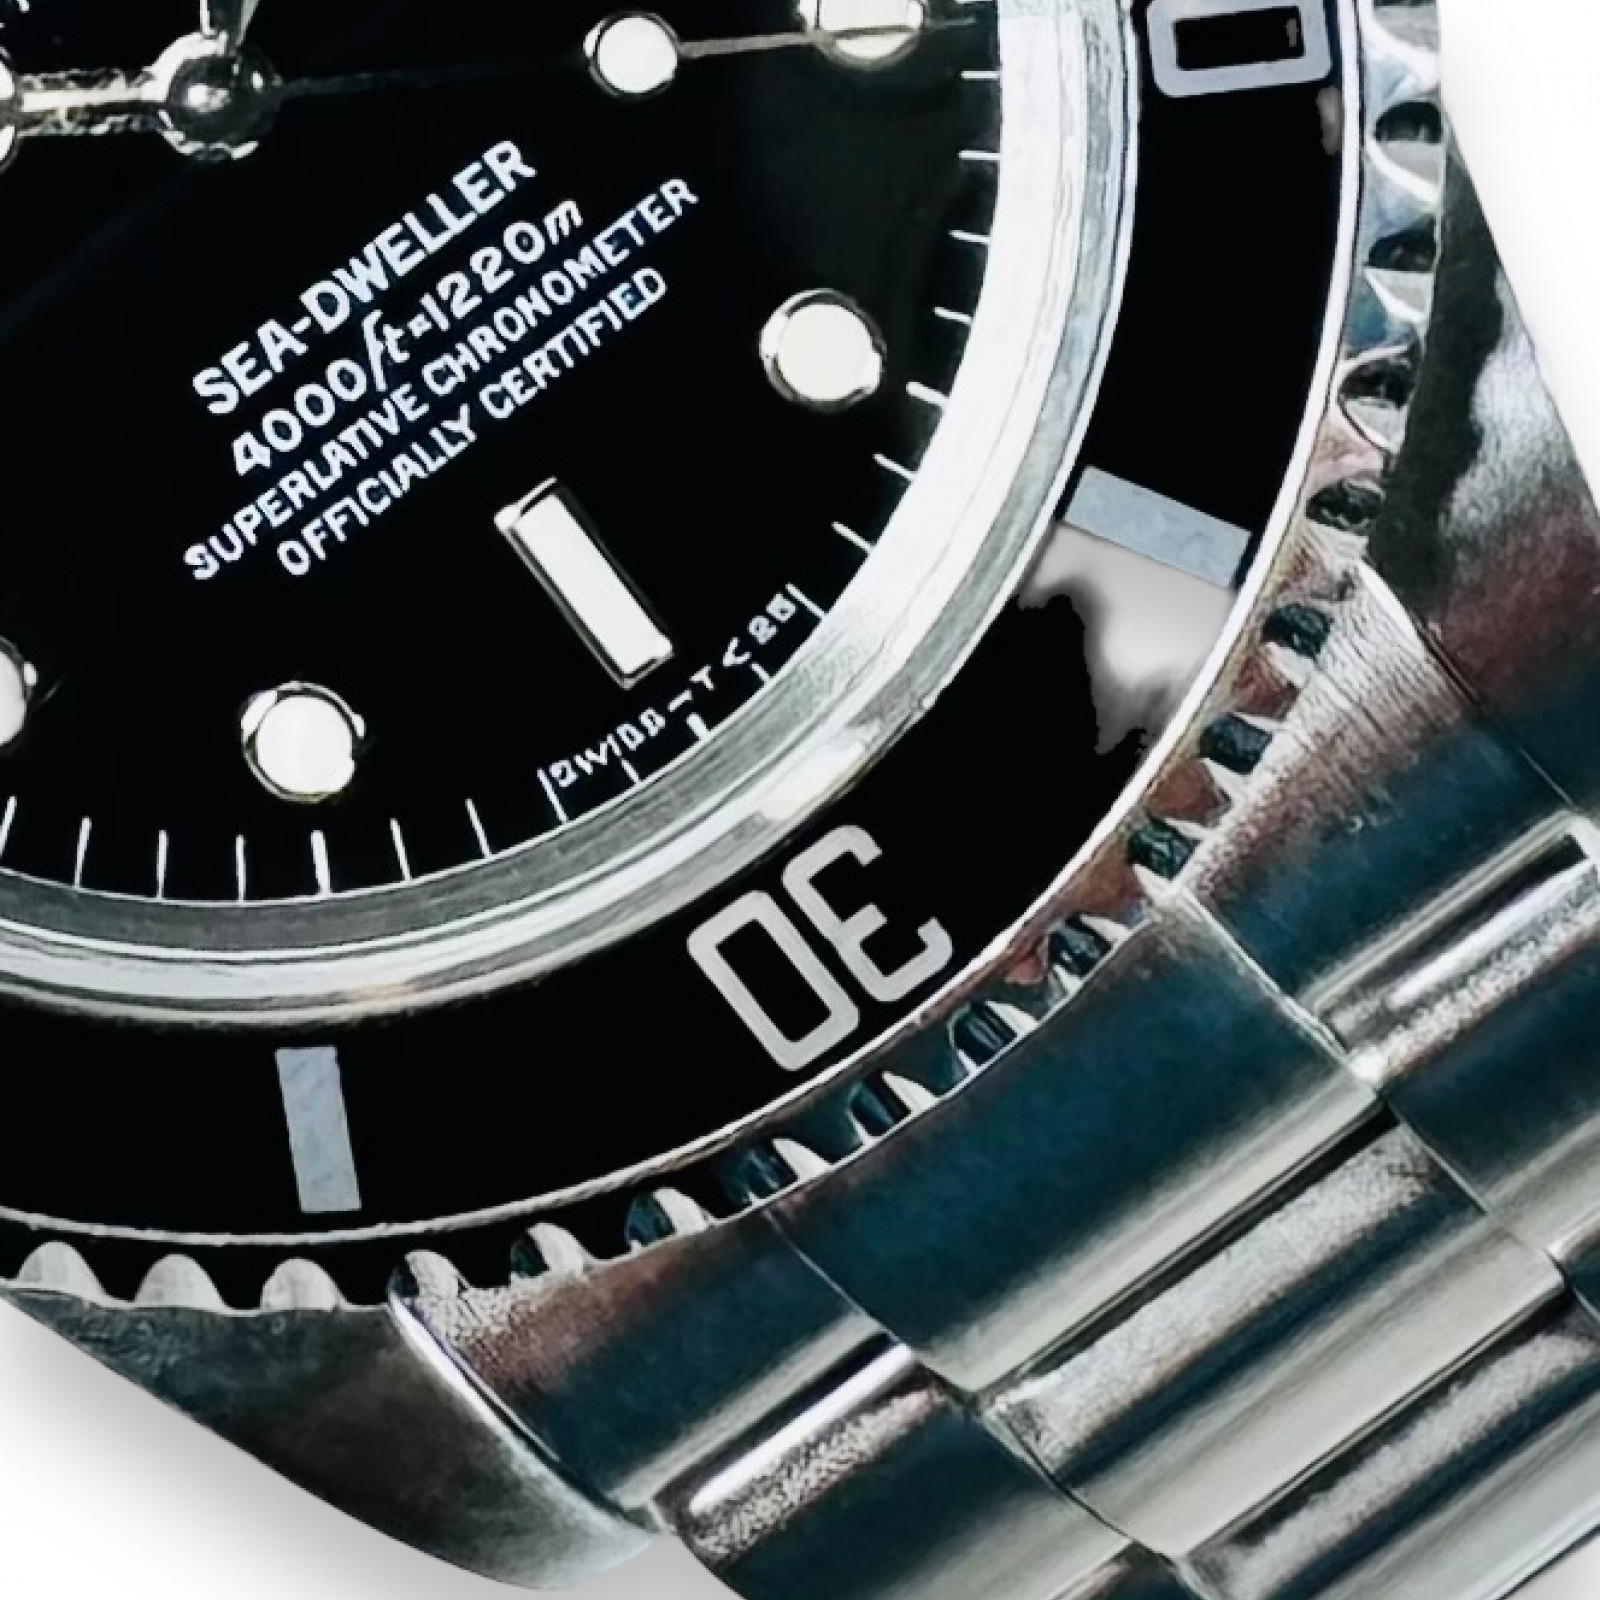 Rolex Sea-Dweller 16600 Owned By Famous Explorer